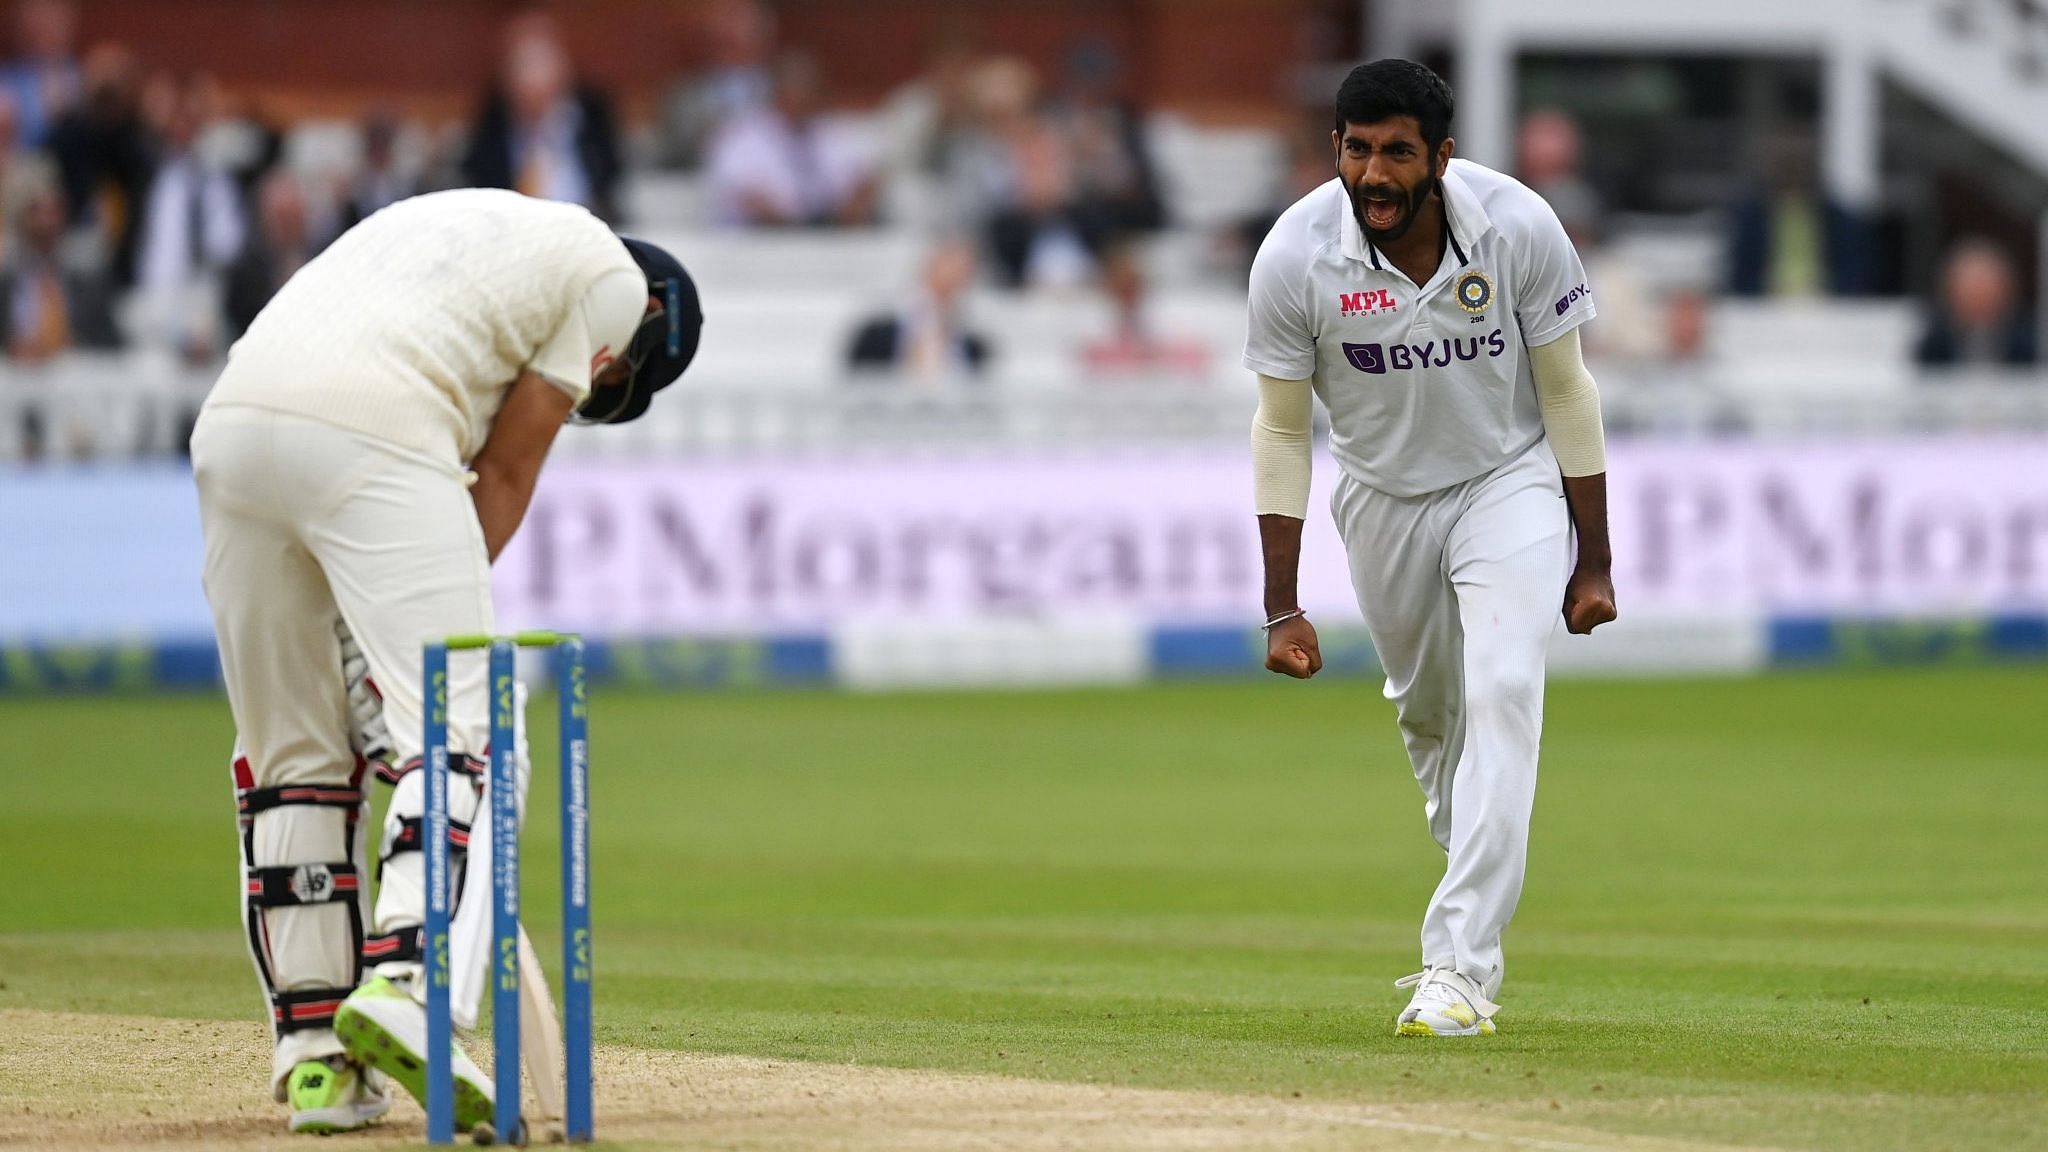 James Anderson opens up on Jasprit Bumrah's bouncer at Lord’s